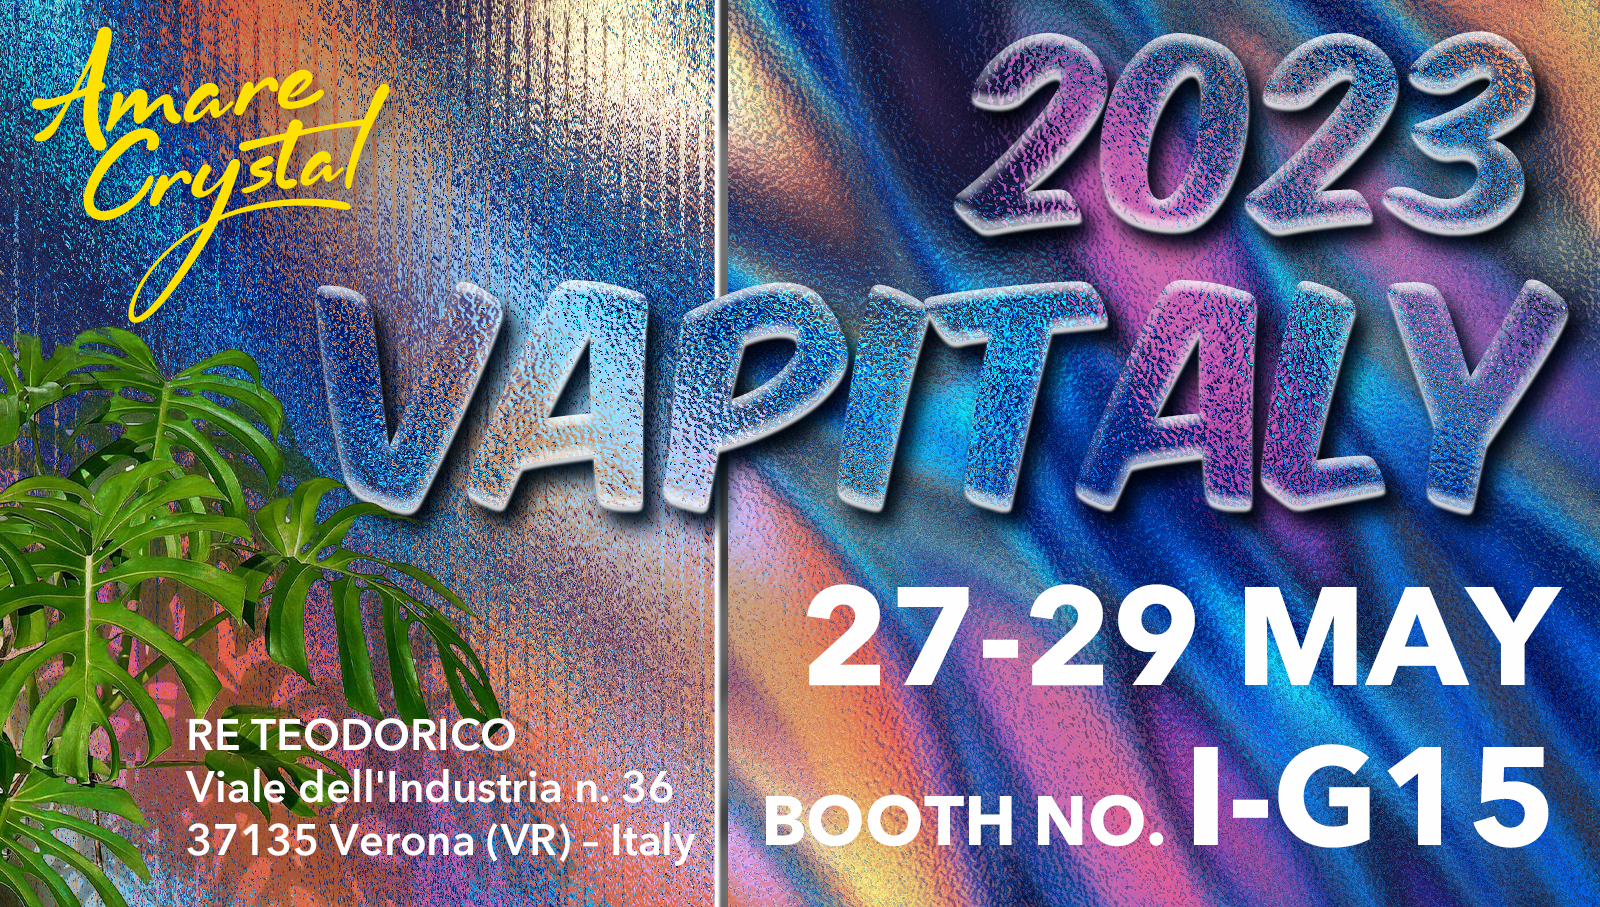 Amare Crystal will be at Vapitaly